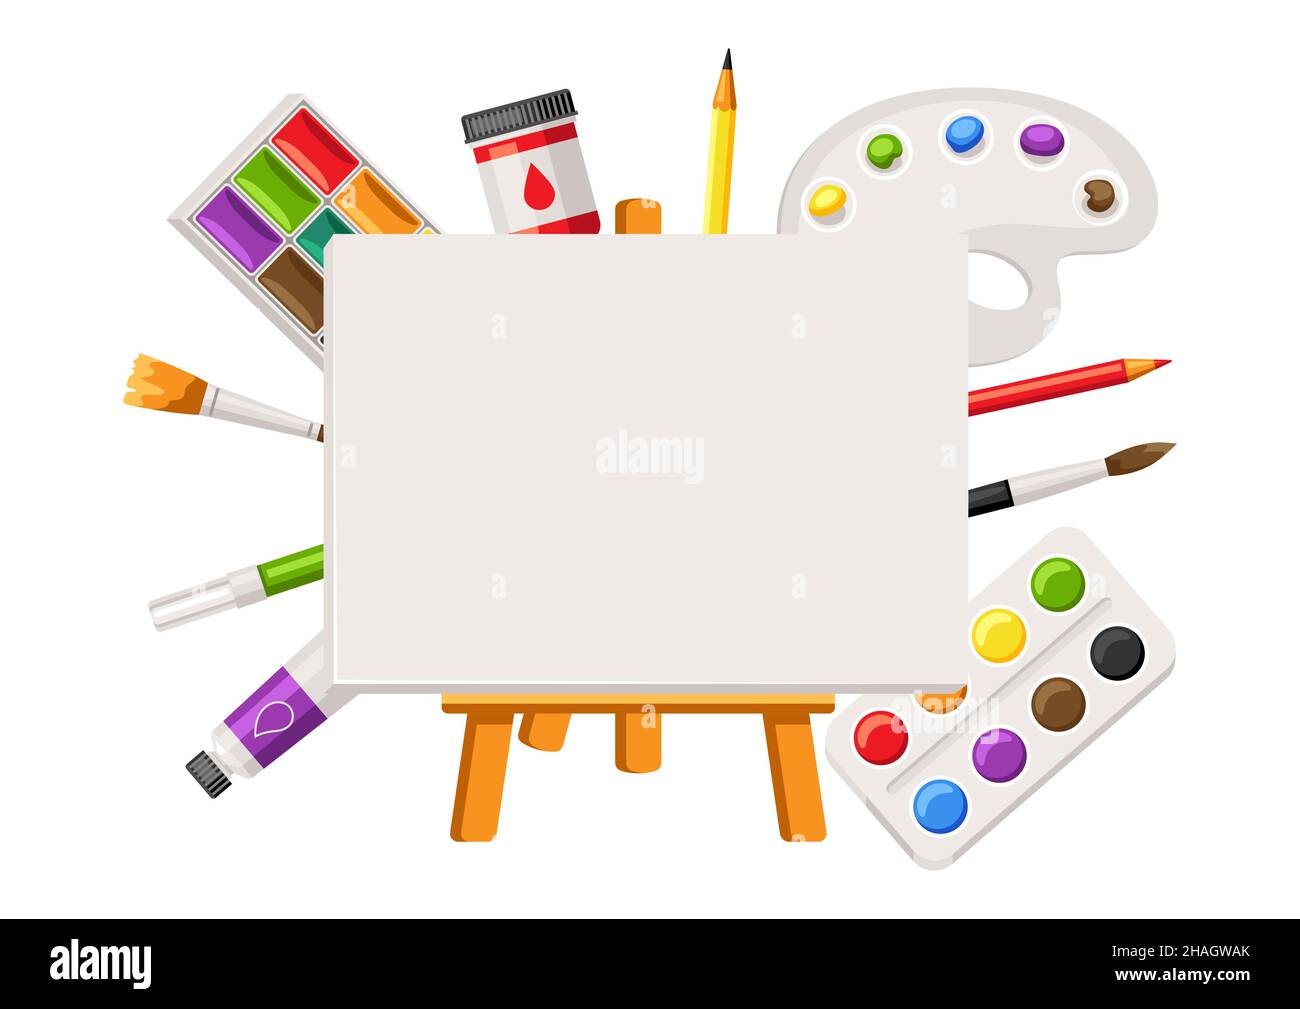 School Supplies. Jars With Colorful Art Paint And Brushes Are On A White  Background. Stock Photo, Picture and Royalty Free Image. Image 145107784.